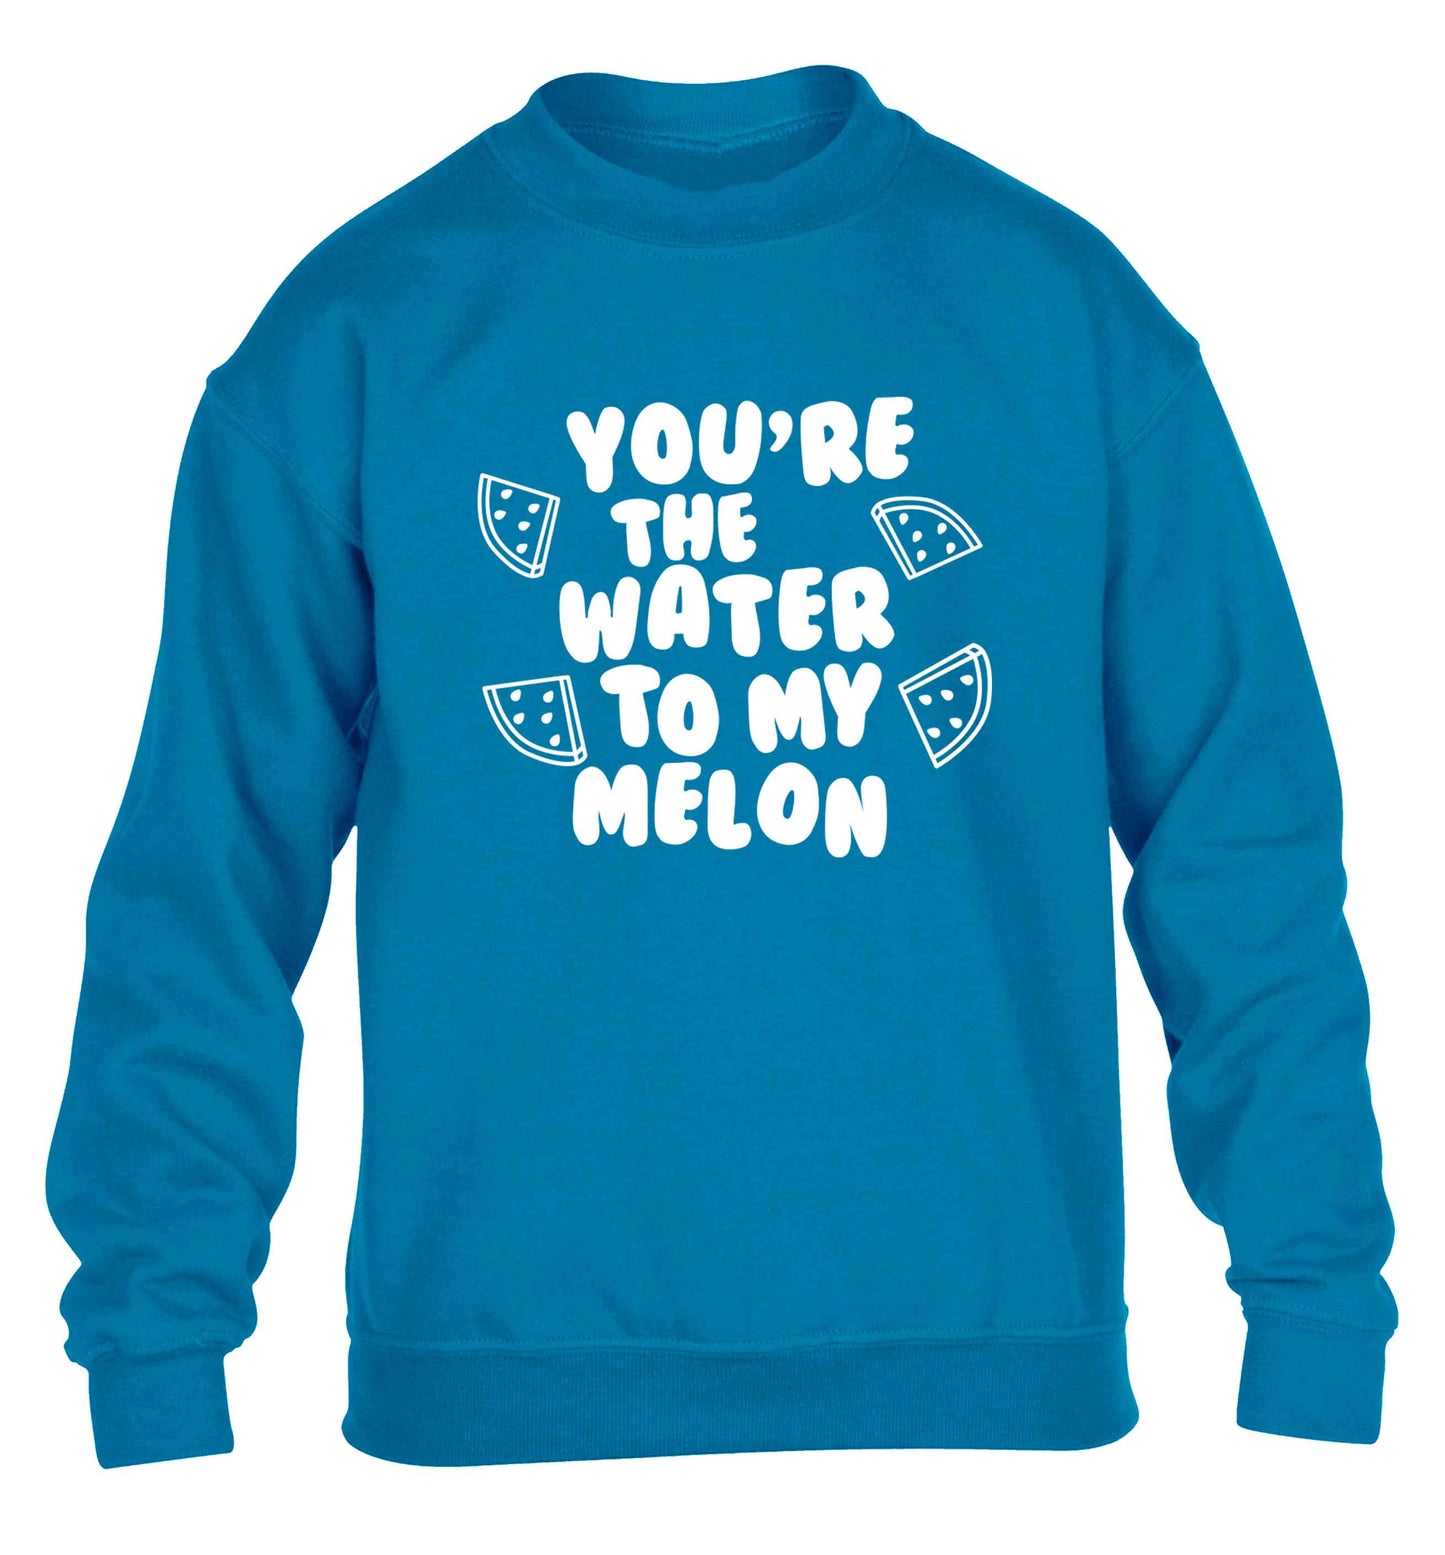 You're the water to my melon children's blue sweater 12-13 Years